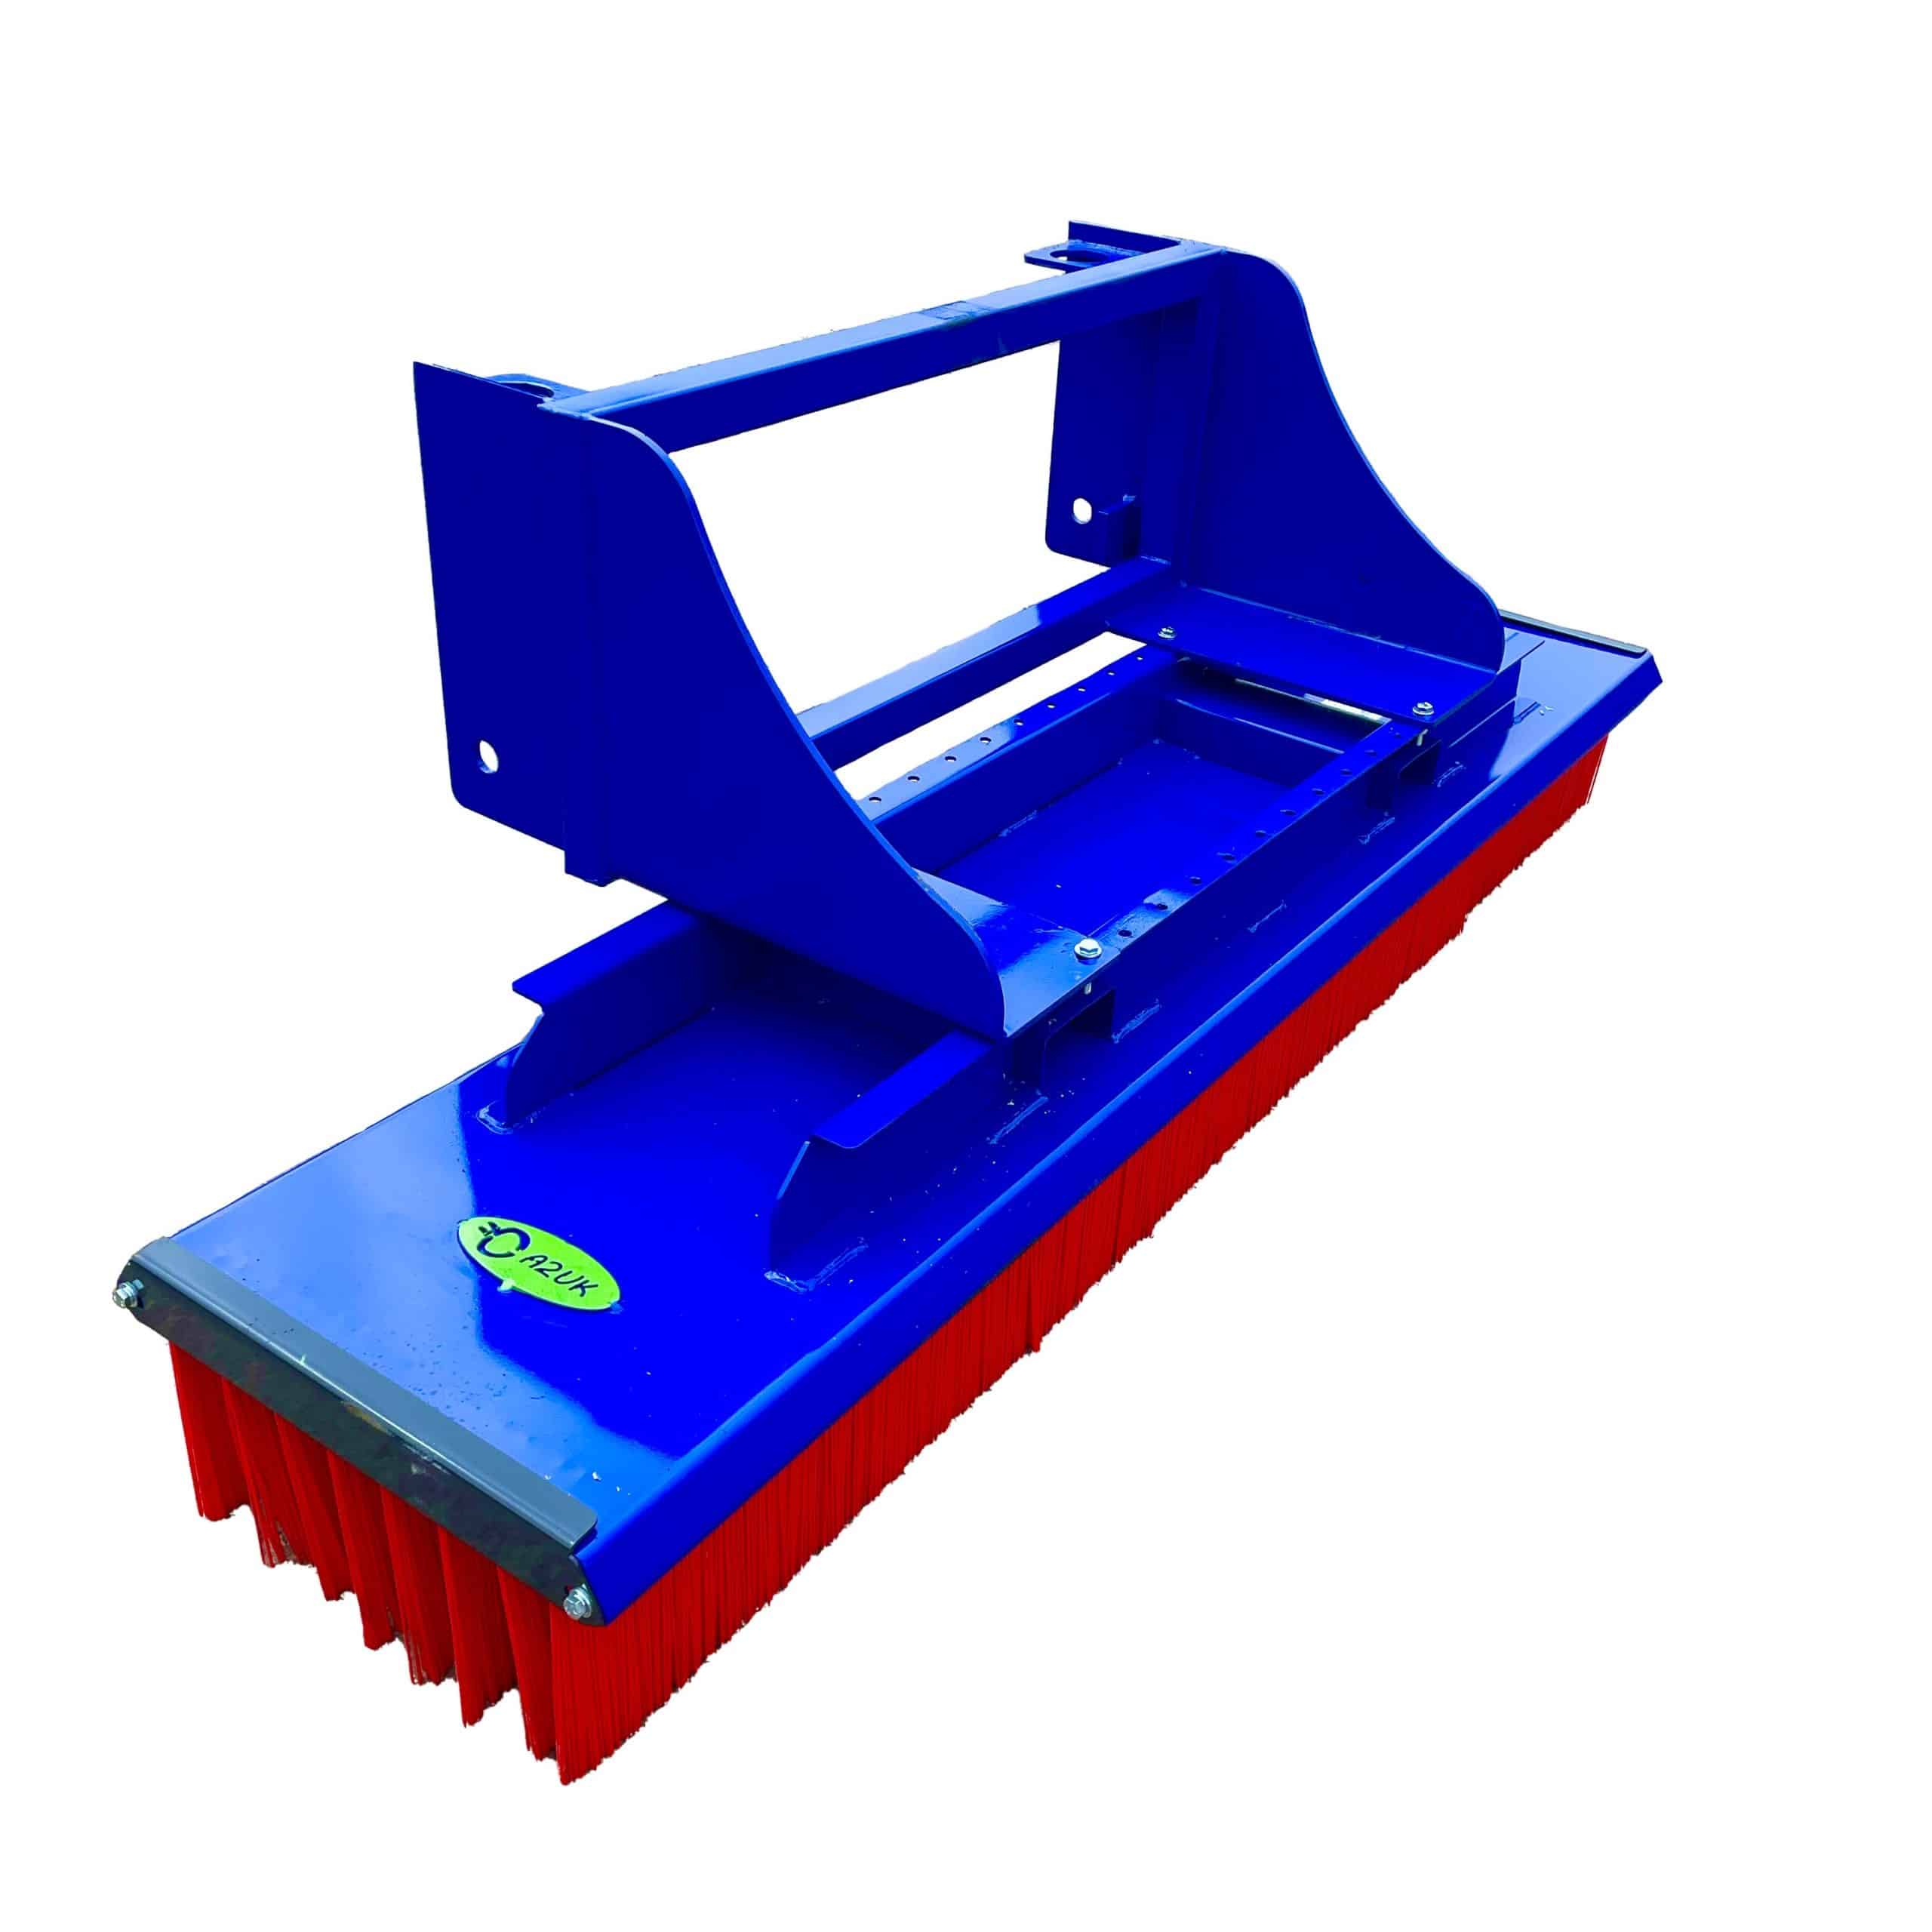 Excavator / Forklift Sweeping Brush Attachment With Pin and Cone Head Bracket